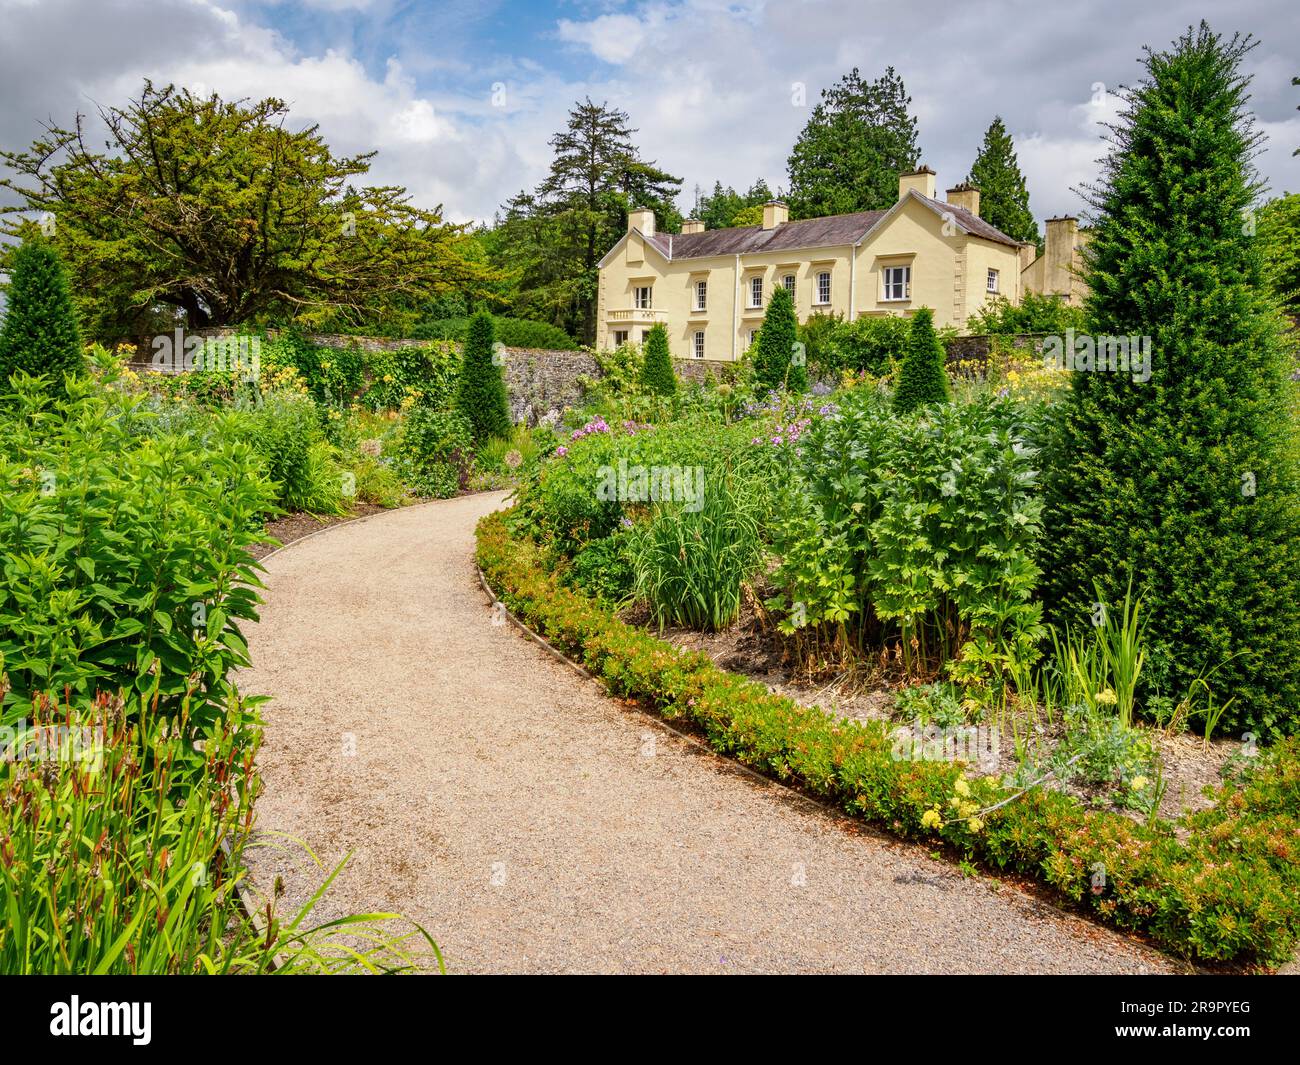 Mansion house and herbaceous borders at Aberglasney Gardens in South Wales UK Stock Photo